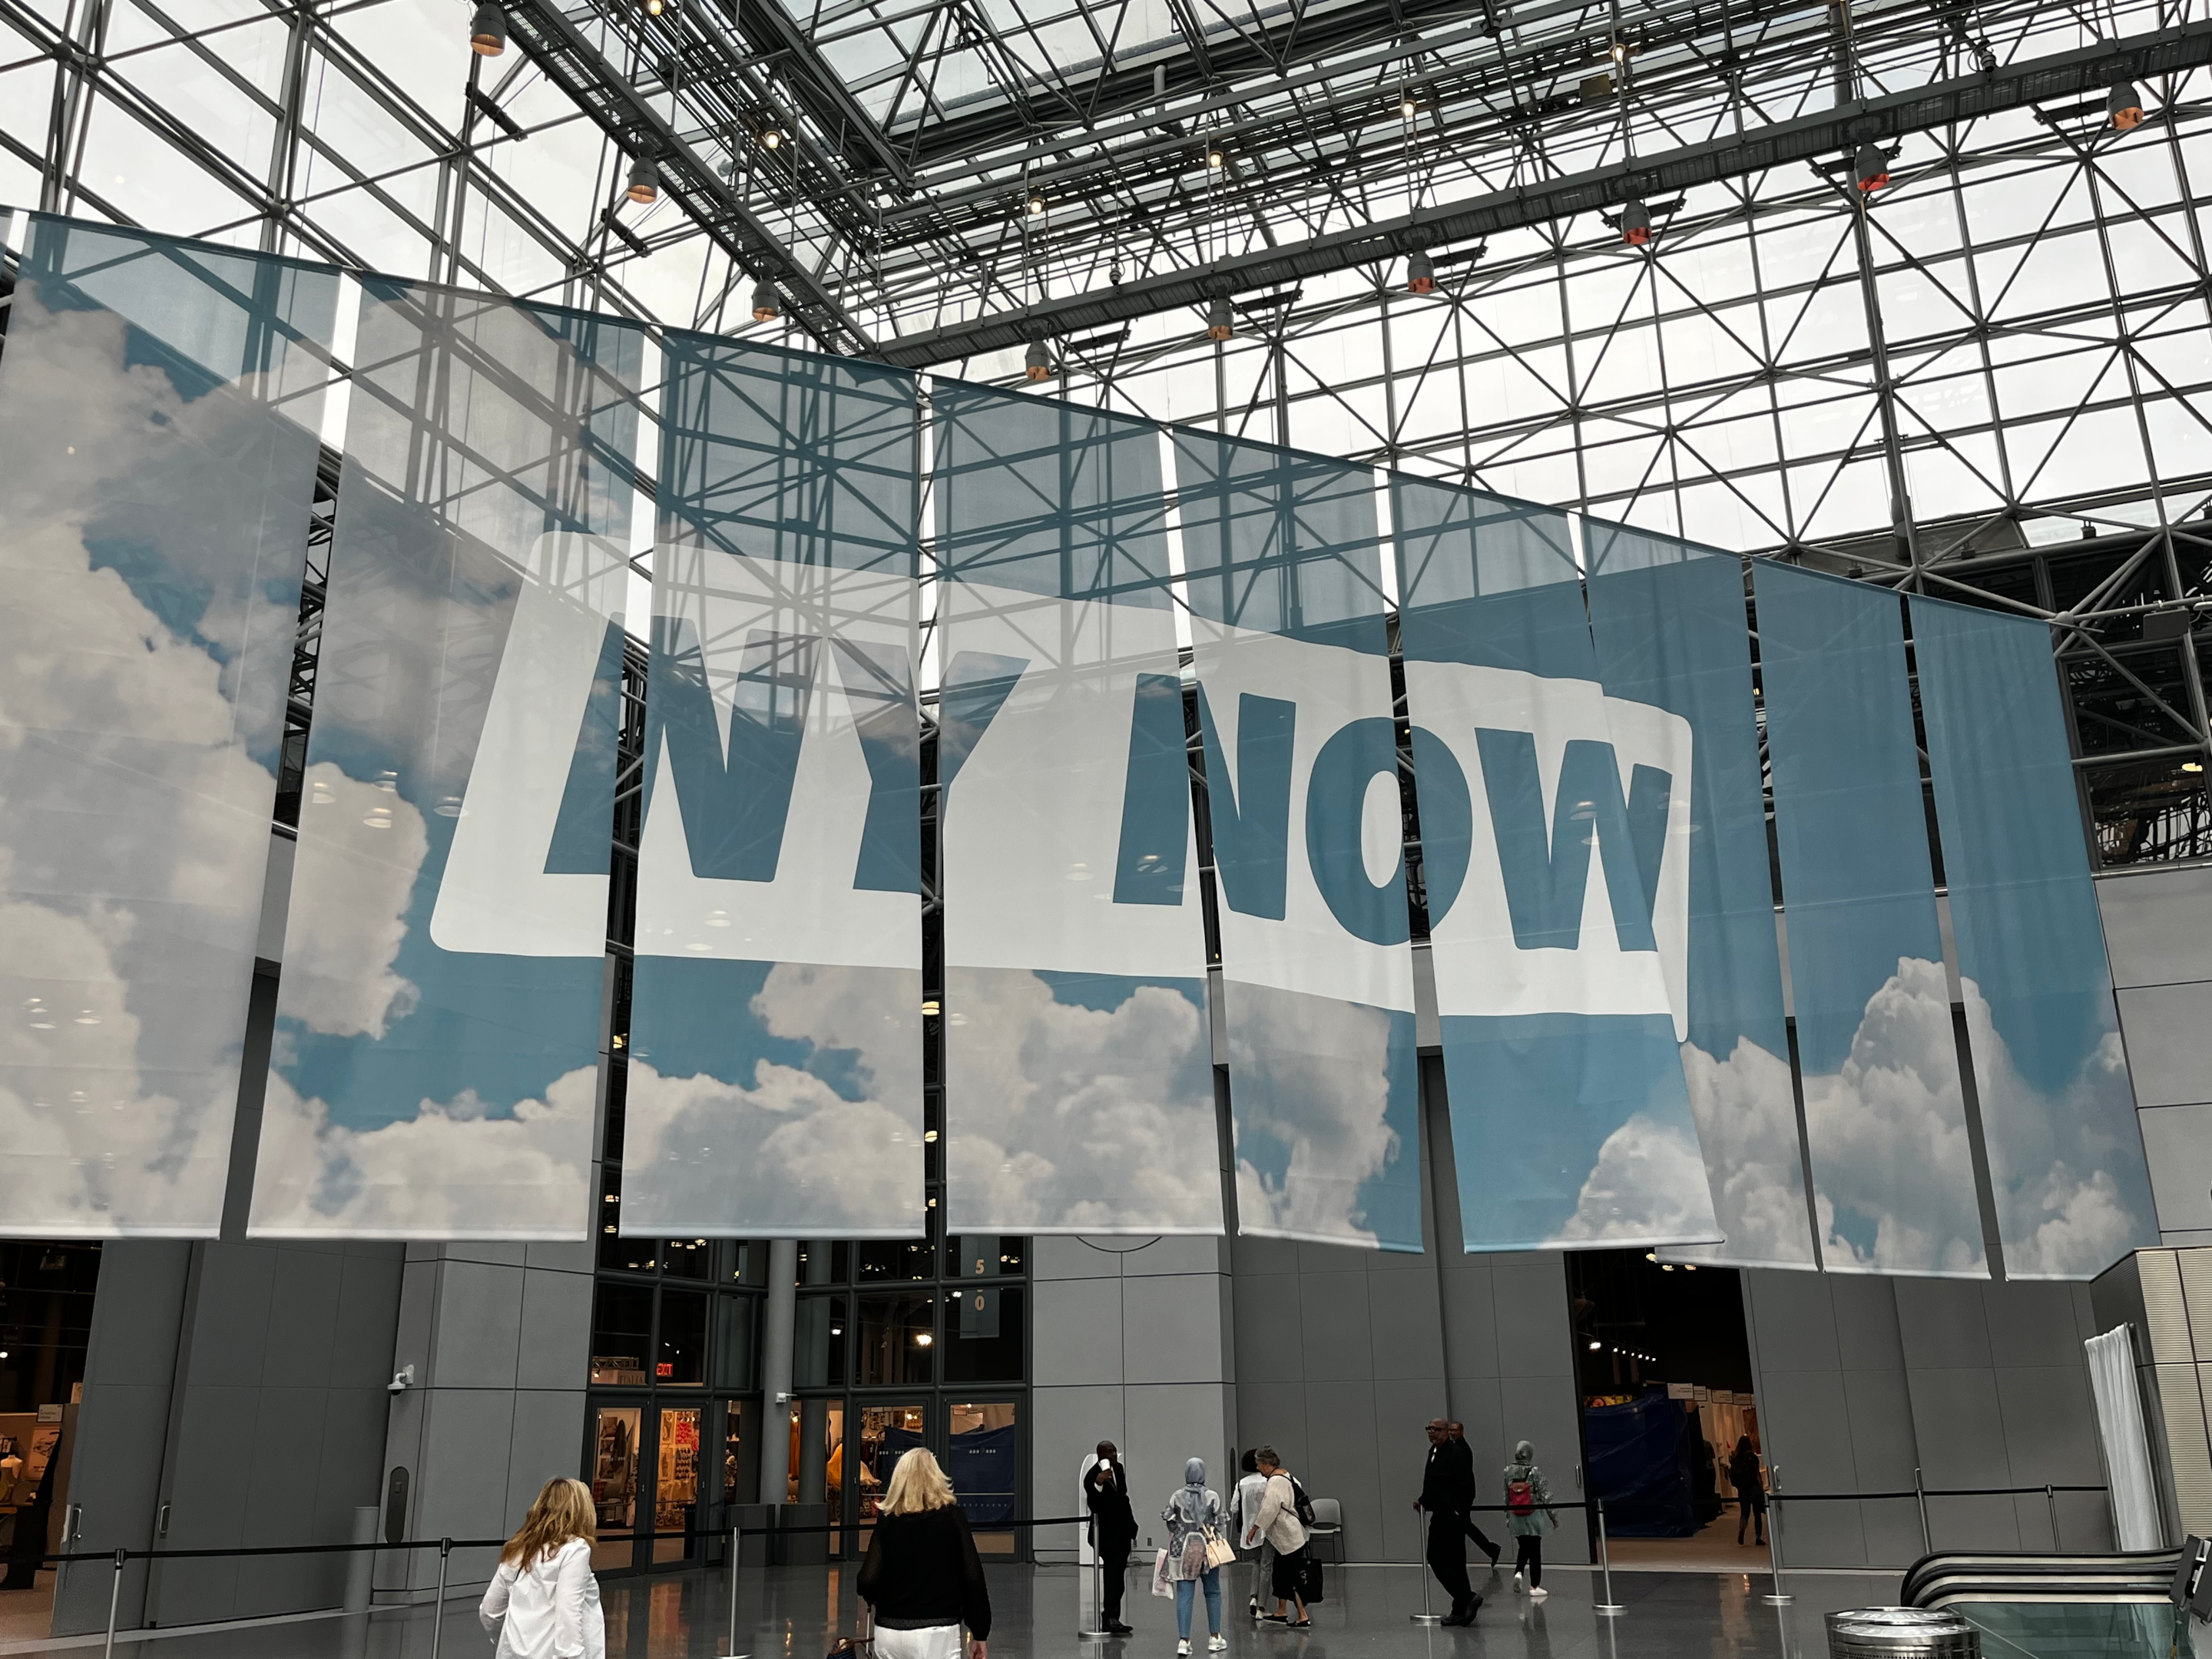 Thousands of people attend the NY NOW show at Javits Center in New York, NY. 